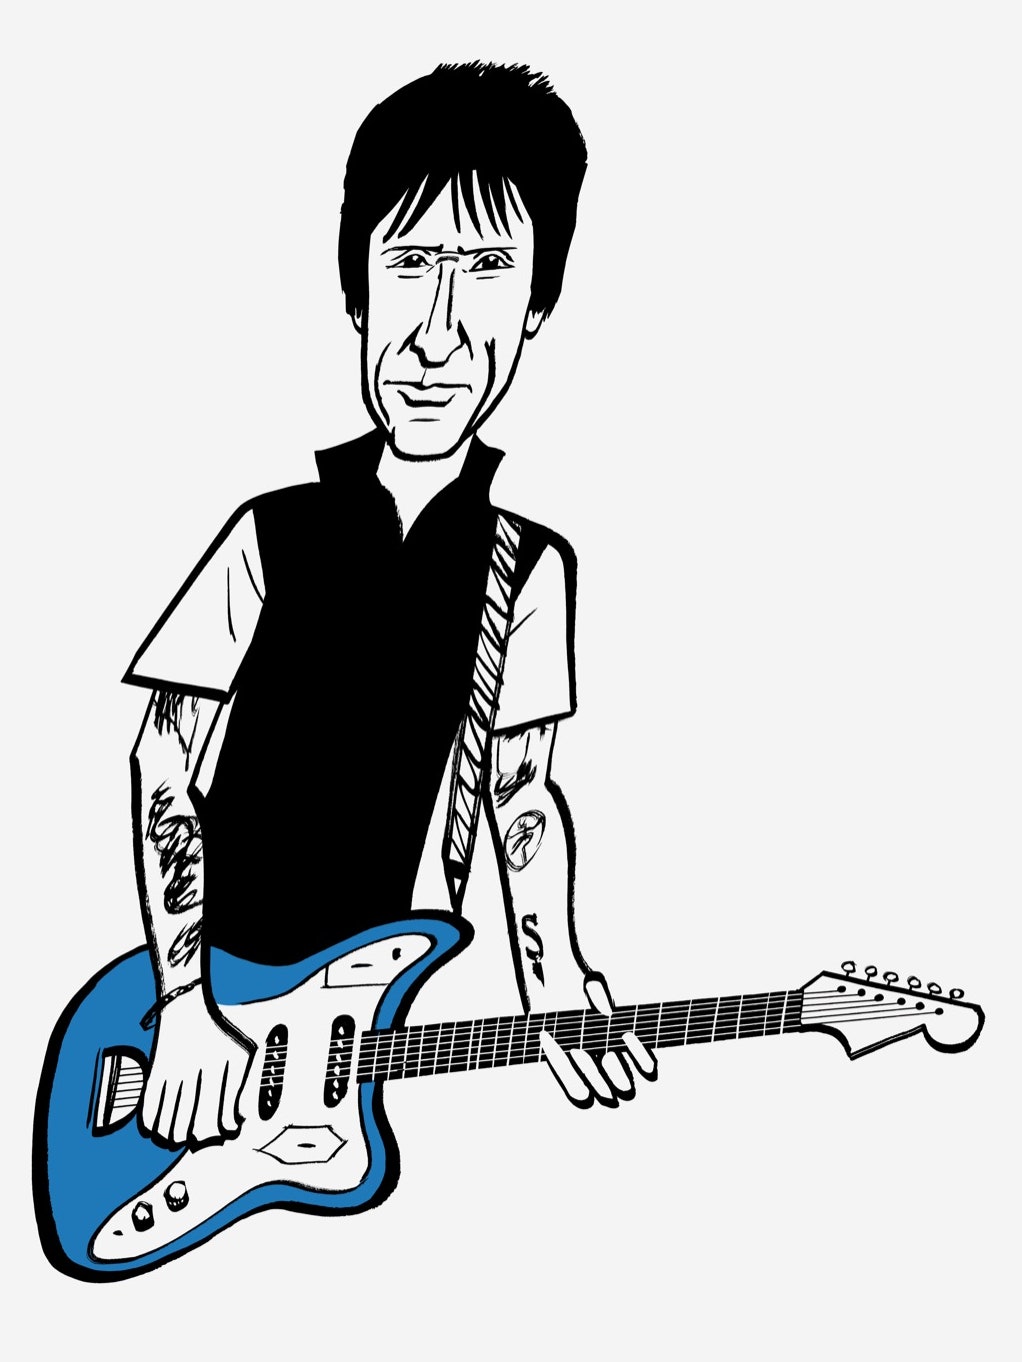 Johnny Marr playing guitar.